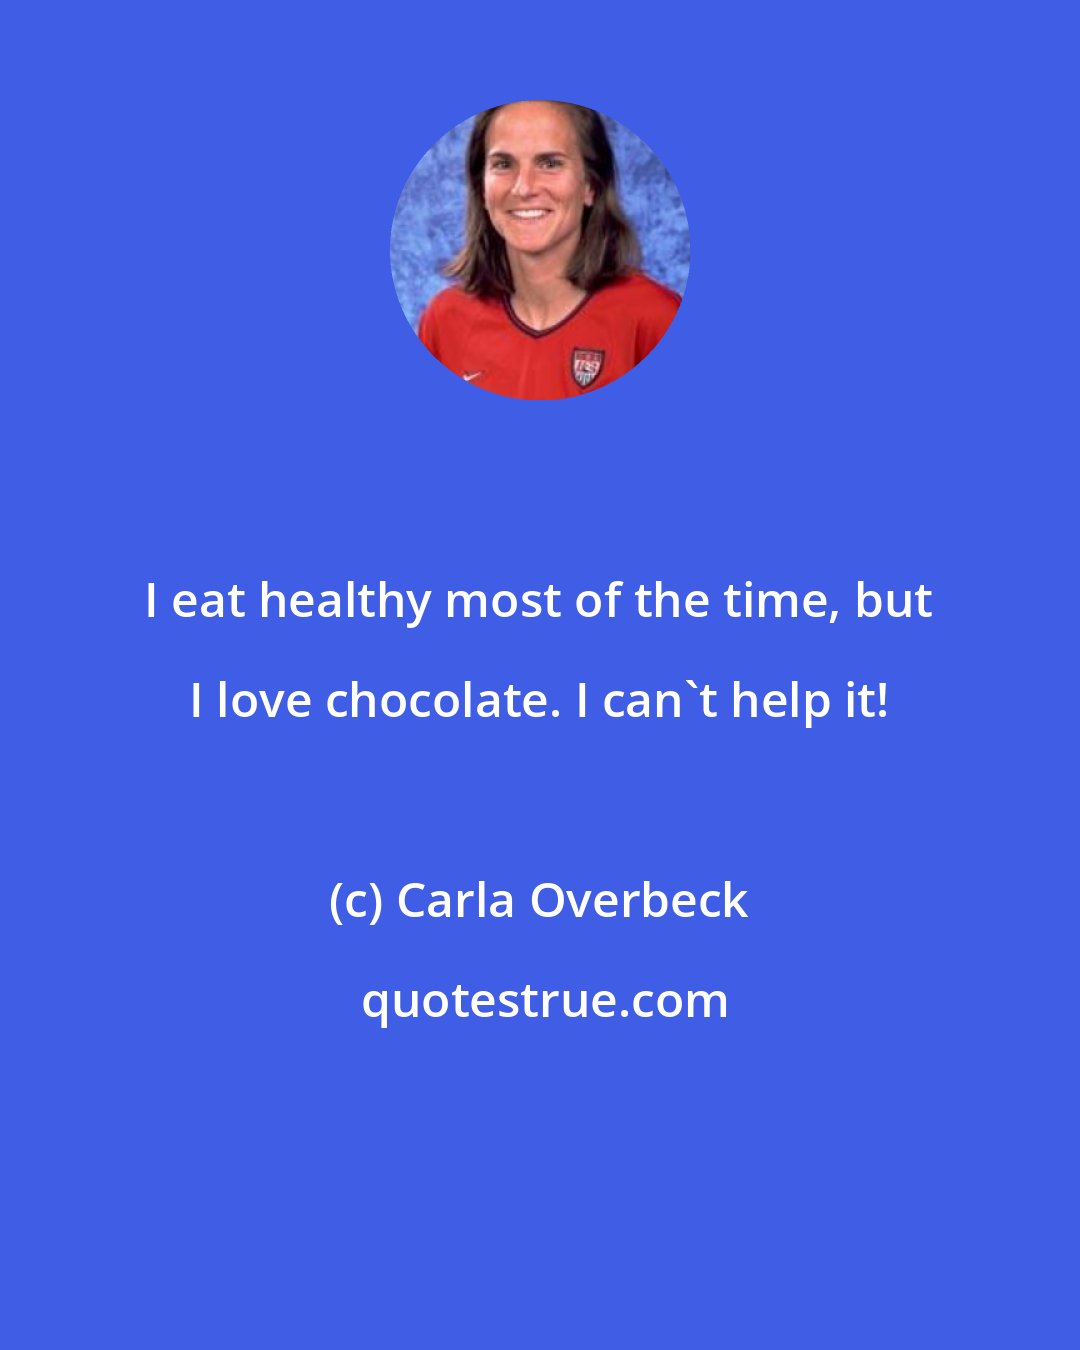 Carla Overbeck: I eat healthy most of the time, but I love chocolate. I can't help it!